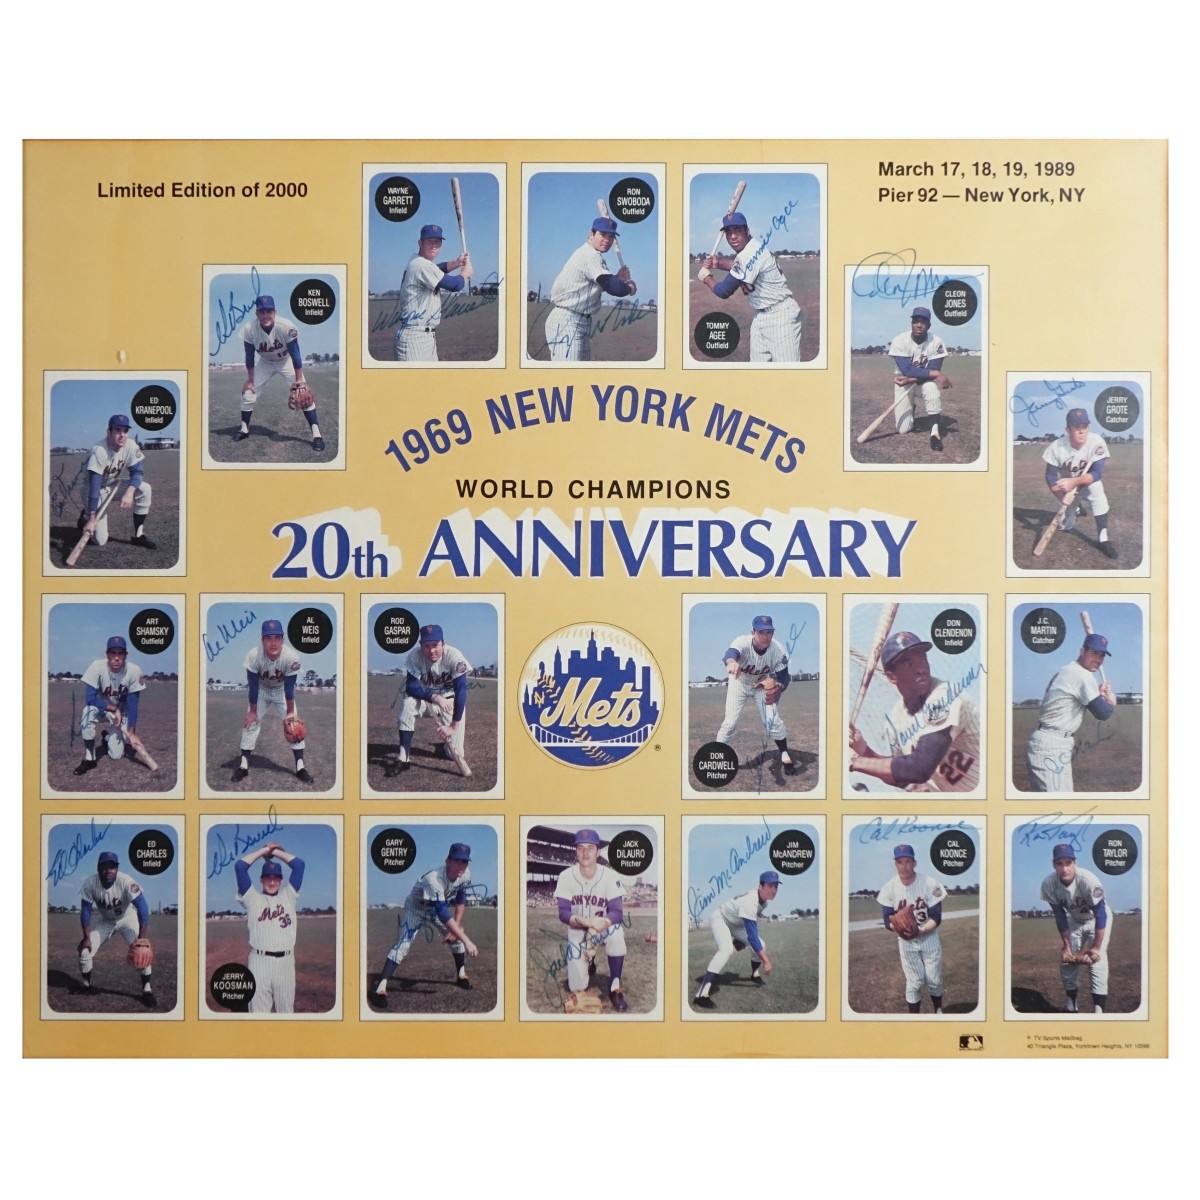 1969 New York Mets Hand Signed Print